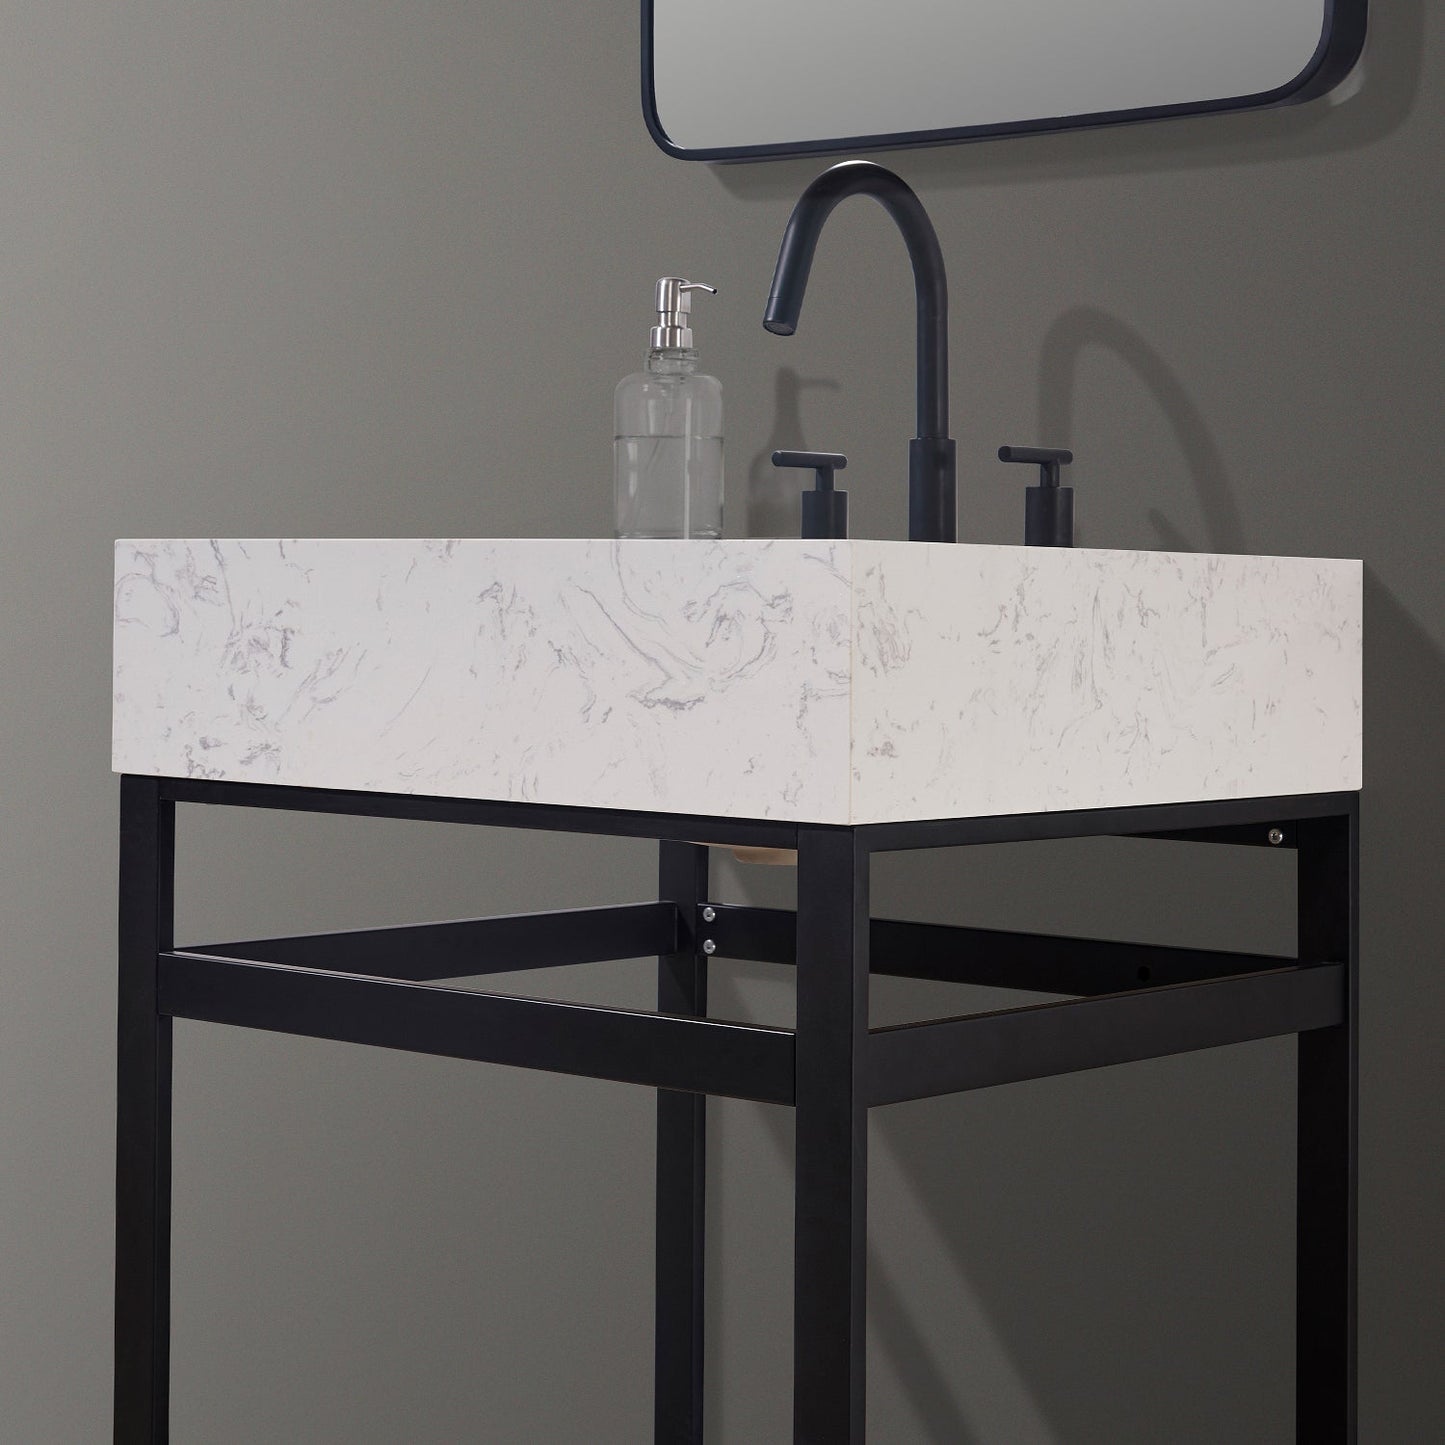 Merano 24" Single Stainless Steel Vanity Console in Matt Black with Aosta White Stone Countertop and Mirror